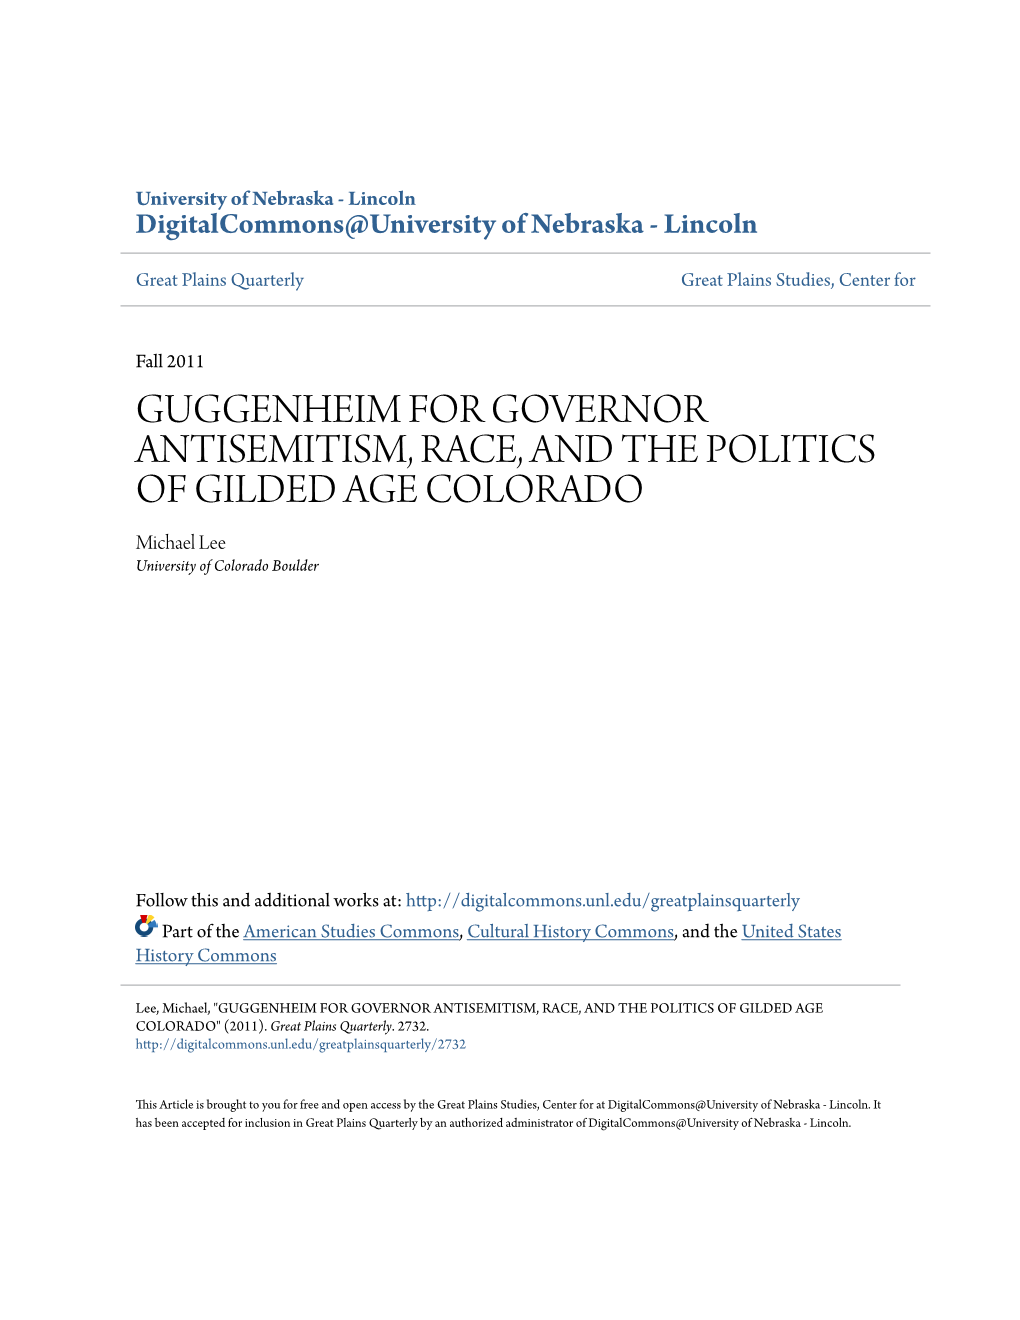 GUGGENHEIM for GOVERNOR ANTISEMITISM, RACE, and the POLITICS of GILDED AGE COLORADO Michael Lee University of Colorado Boulder